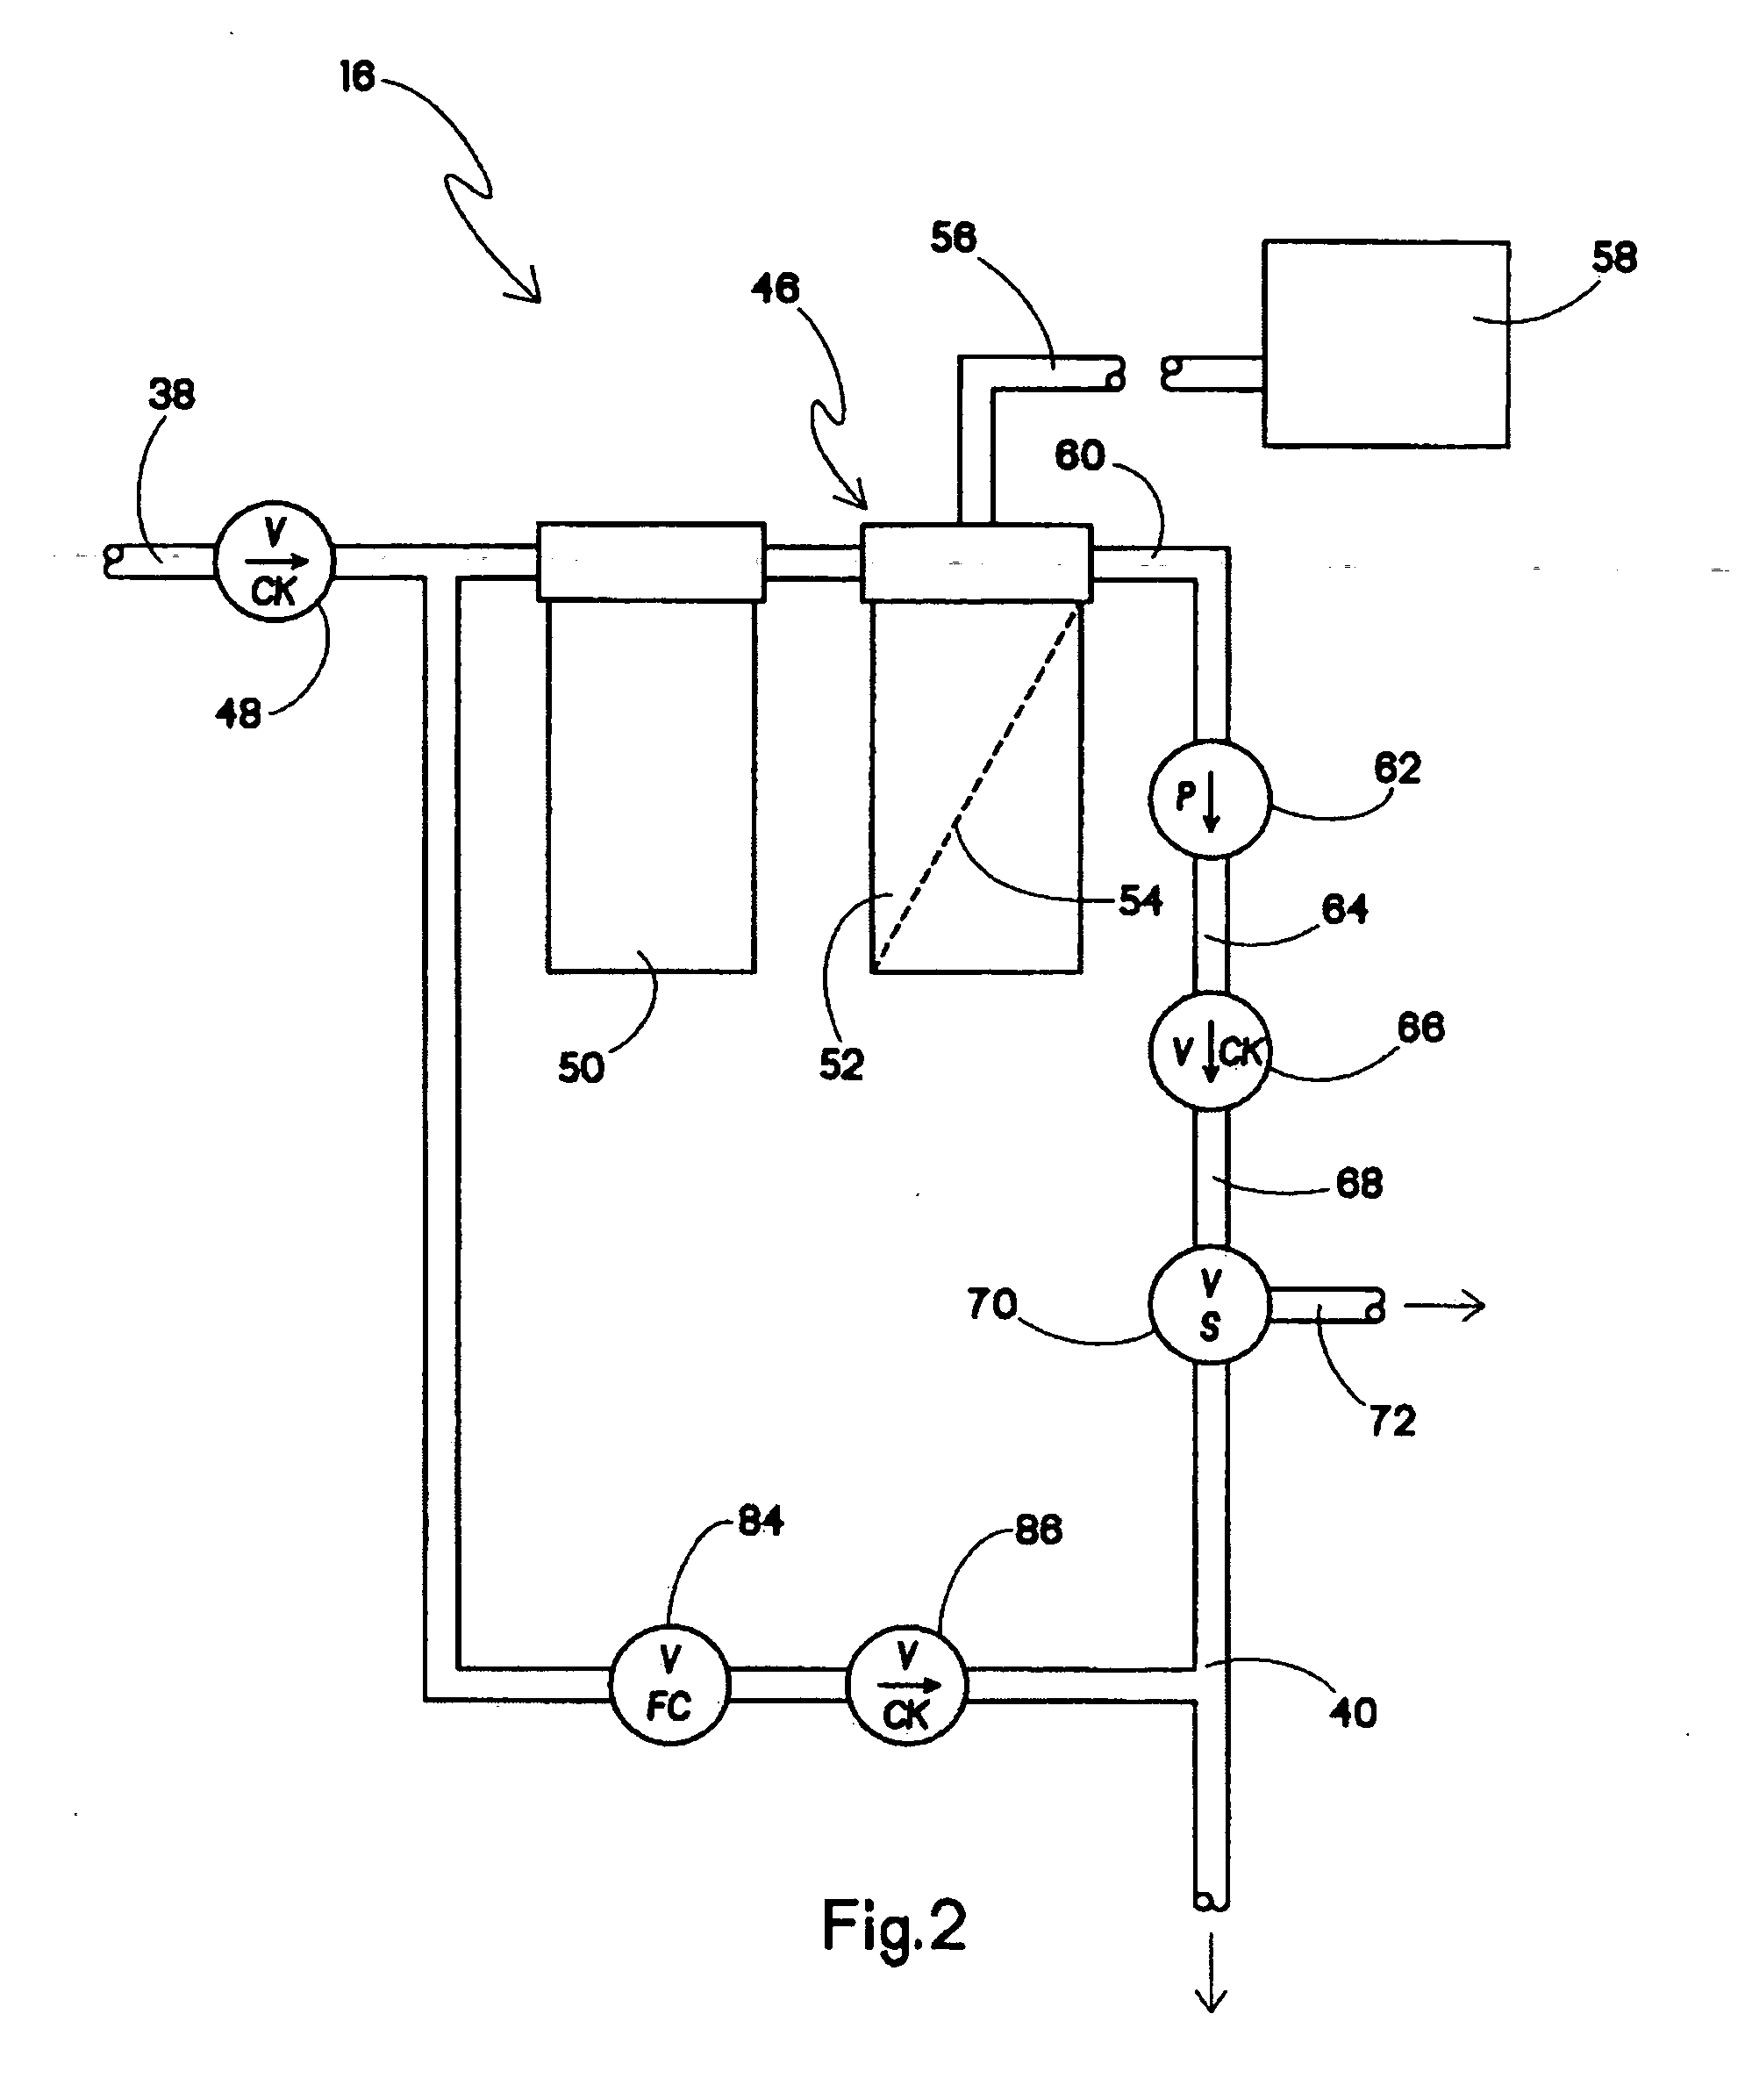 Flow-through tank for water treatment